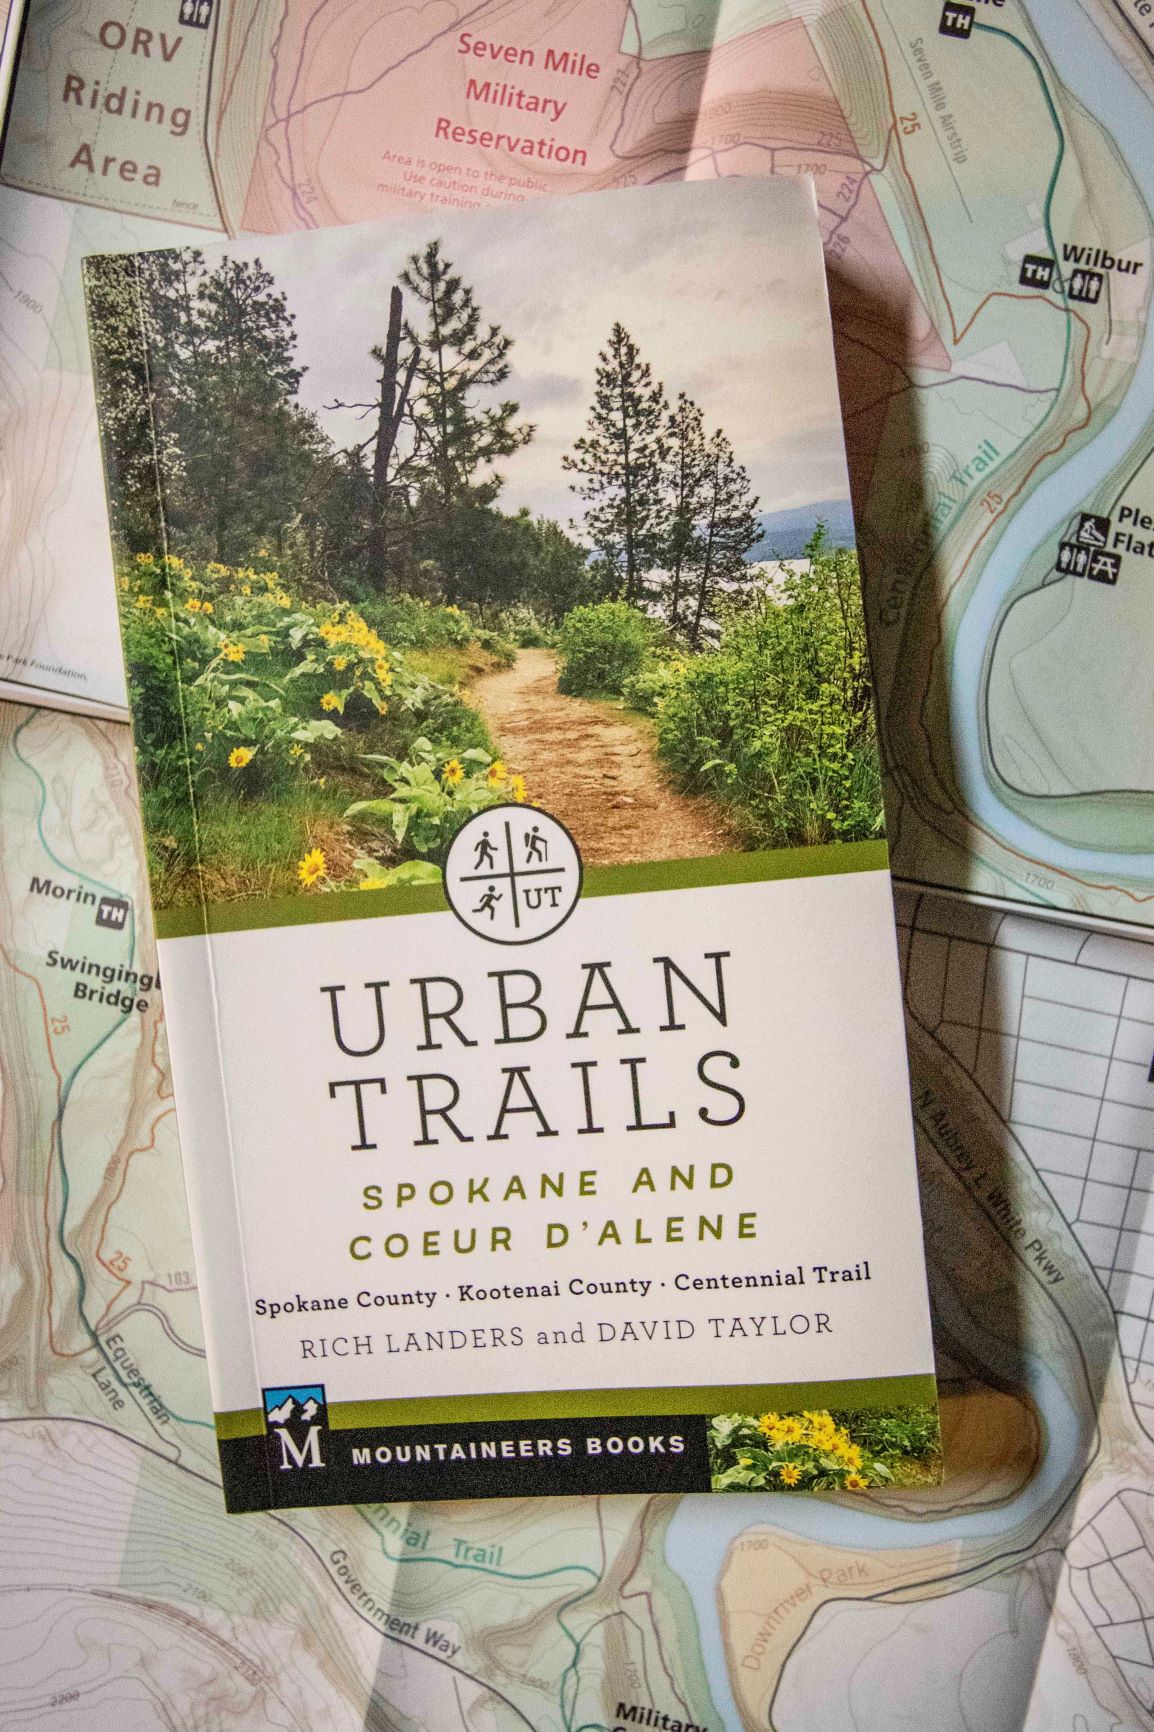 Urban Trails book on a map.